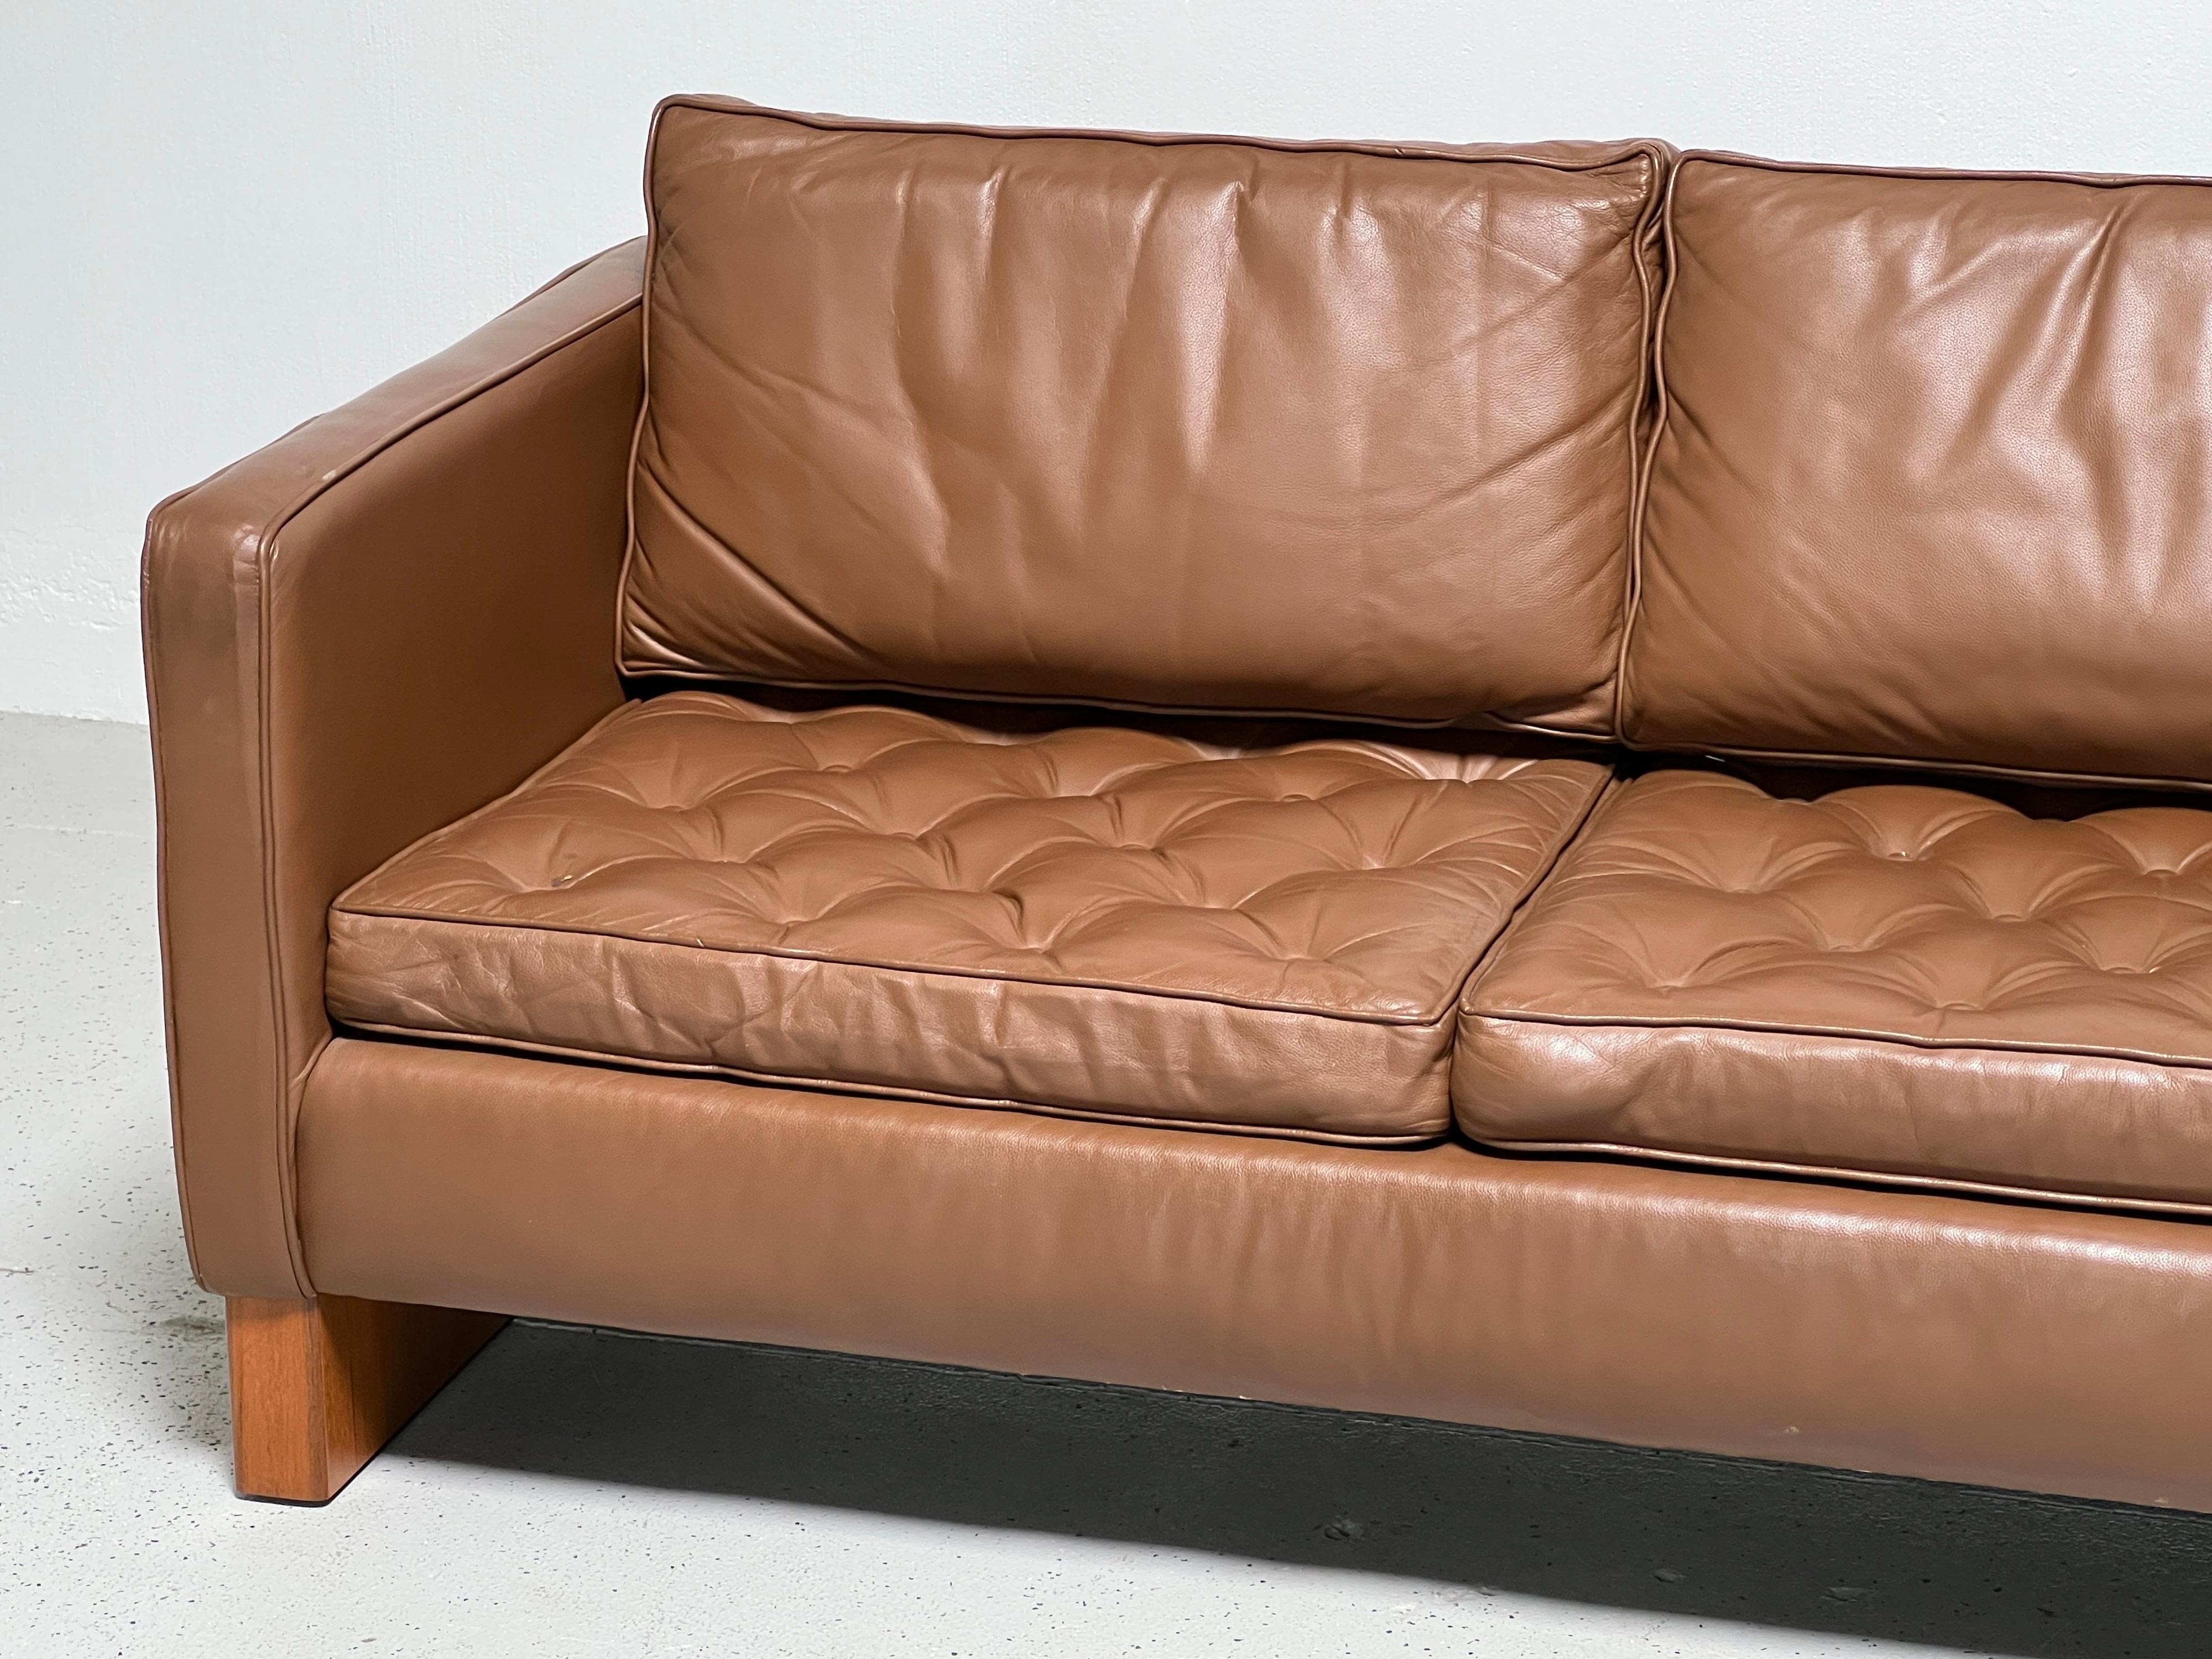 mies van der rohe couch